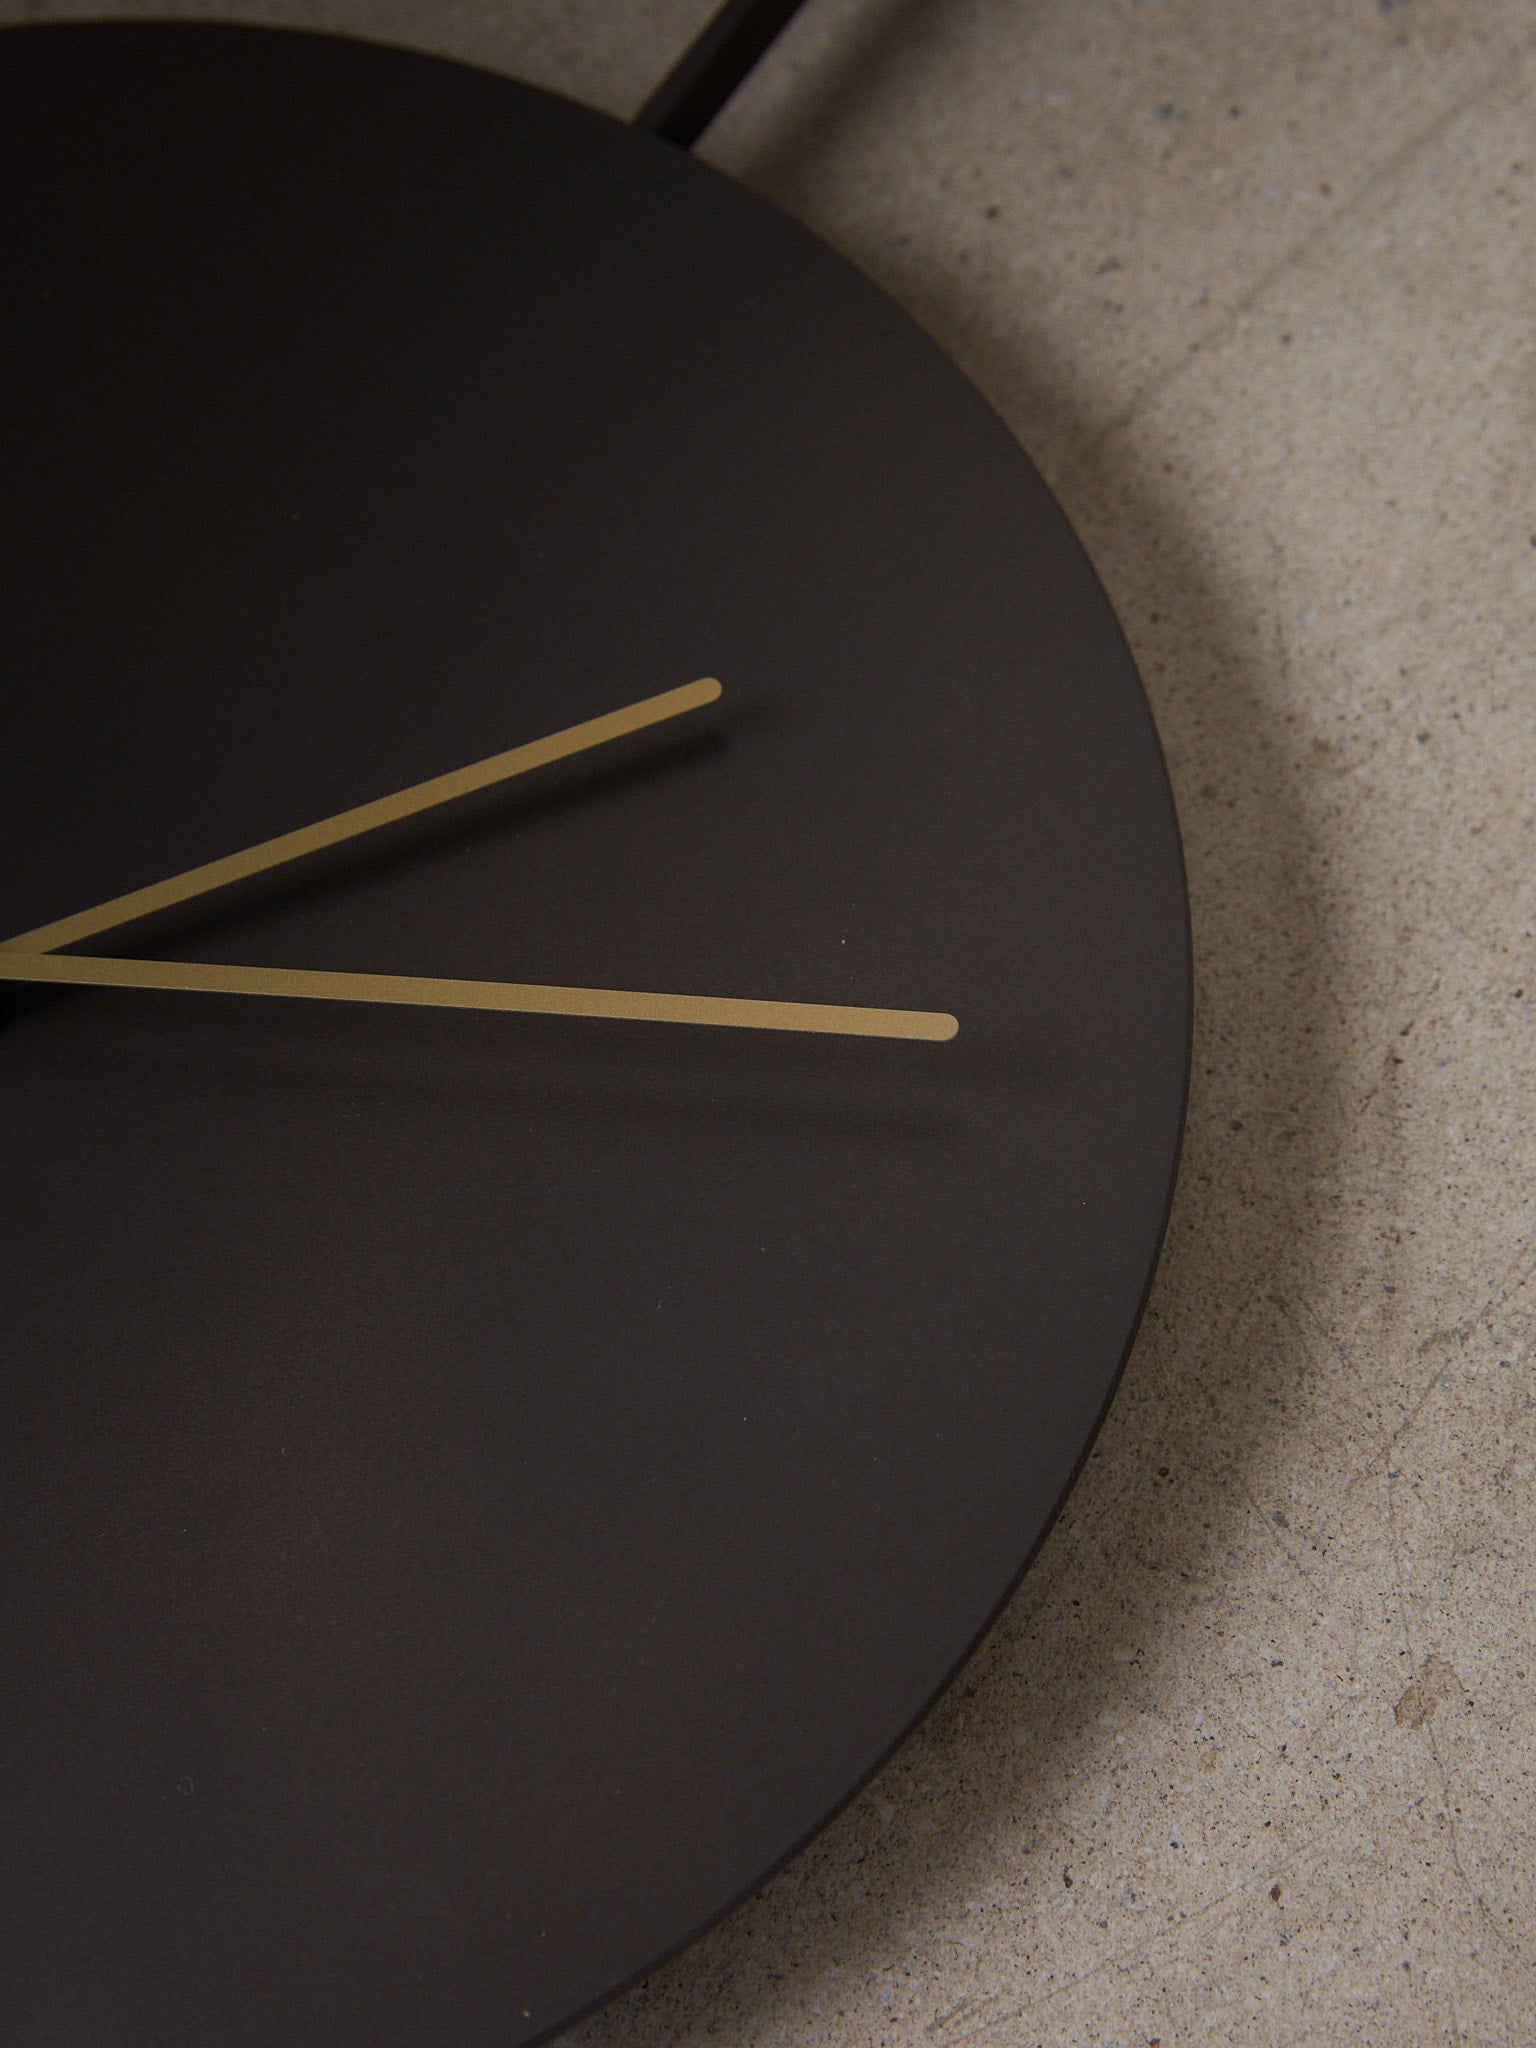 Trace Wall Clock. Minimalist, elegant wall clock with brass hands on a background of blackened steel, revealing only the constant, subtle movements of two hands reflecting the trace of time.